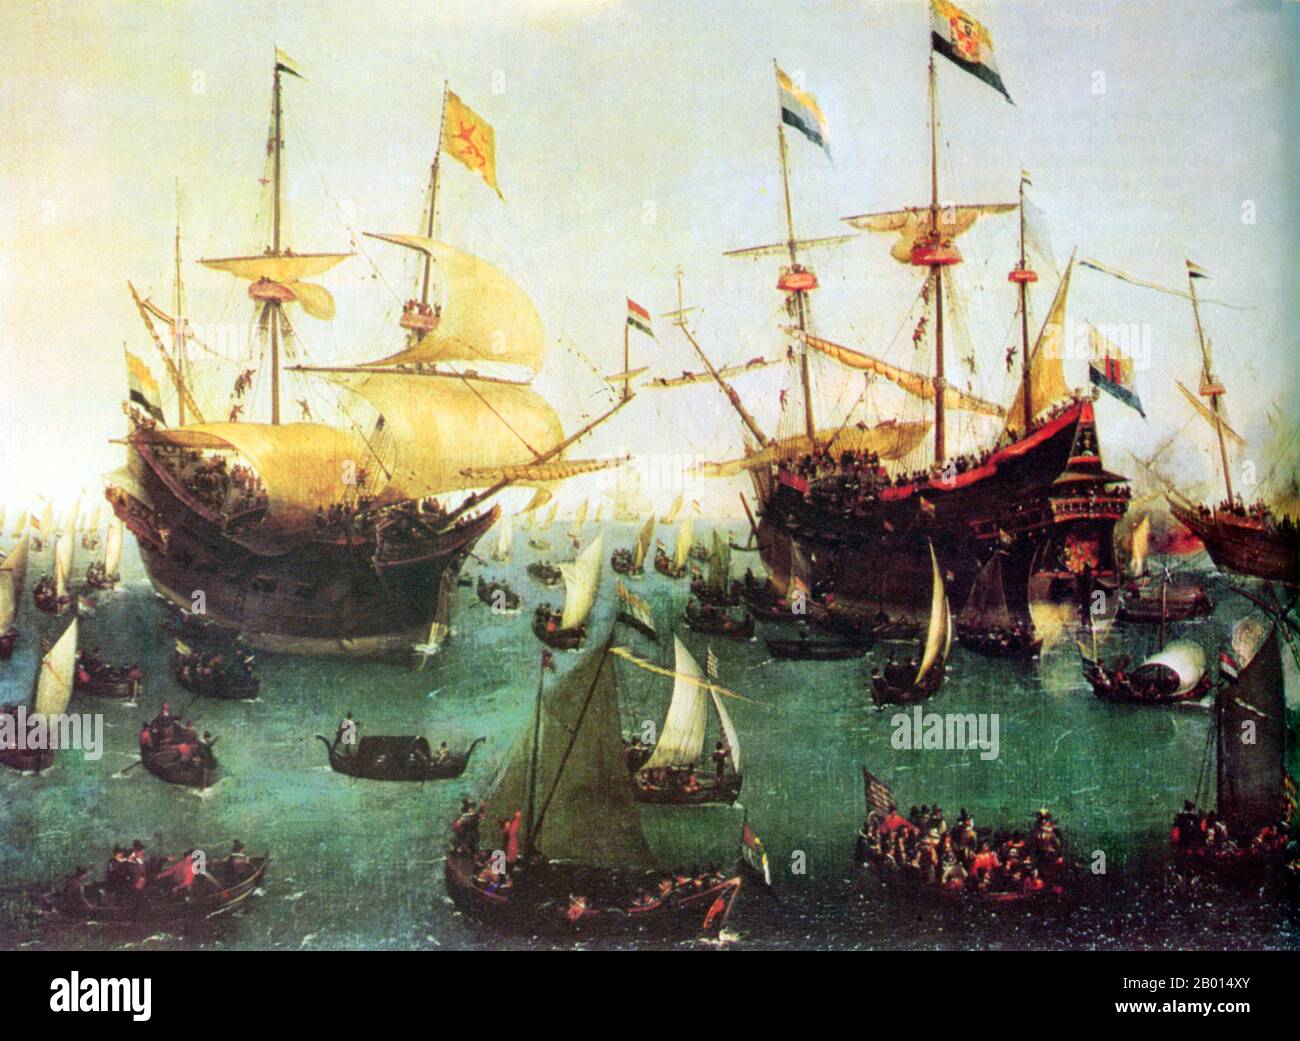 Netherlands/Indonesia: 'The Return to Amsterdam of the Second Expedition to the East Indies'. Oil on canvas painting by Cornelis Vroom (1590-1661), 1599.  The Dutch East India Company, or VOC, was a chartered company granted a monopoly by the Dutch government to carry out colonial activities in Asia. It was the first multinational corporation in the world and the first company to issue stock. It was also arguably the world's first megacorporation, possessing quasi-governmental powers, including the ability to wage war, imprison and execute convicts, negotiate treaties and establish colonies. Stock Photo